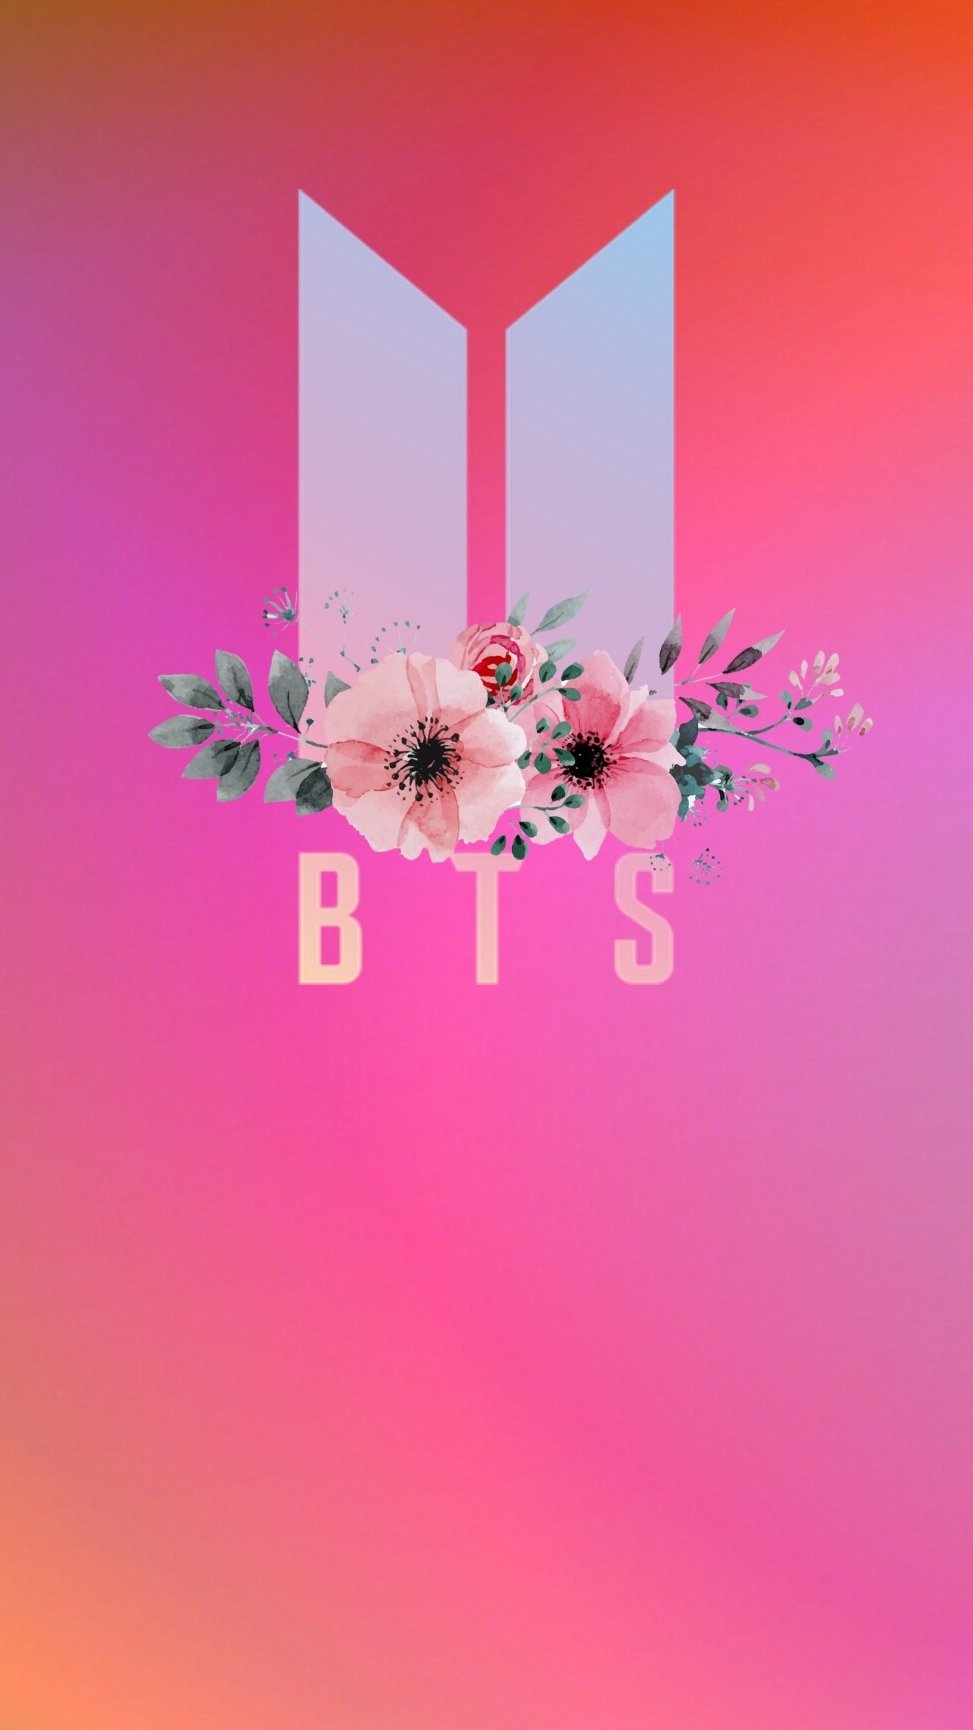 BTS Phone Wallpapers on Twitter: "[REQUEST] Wallpapers created by me